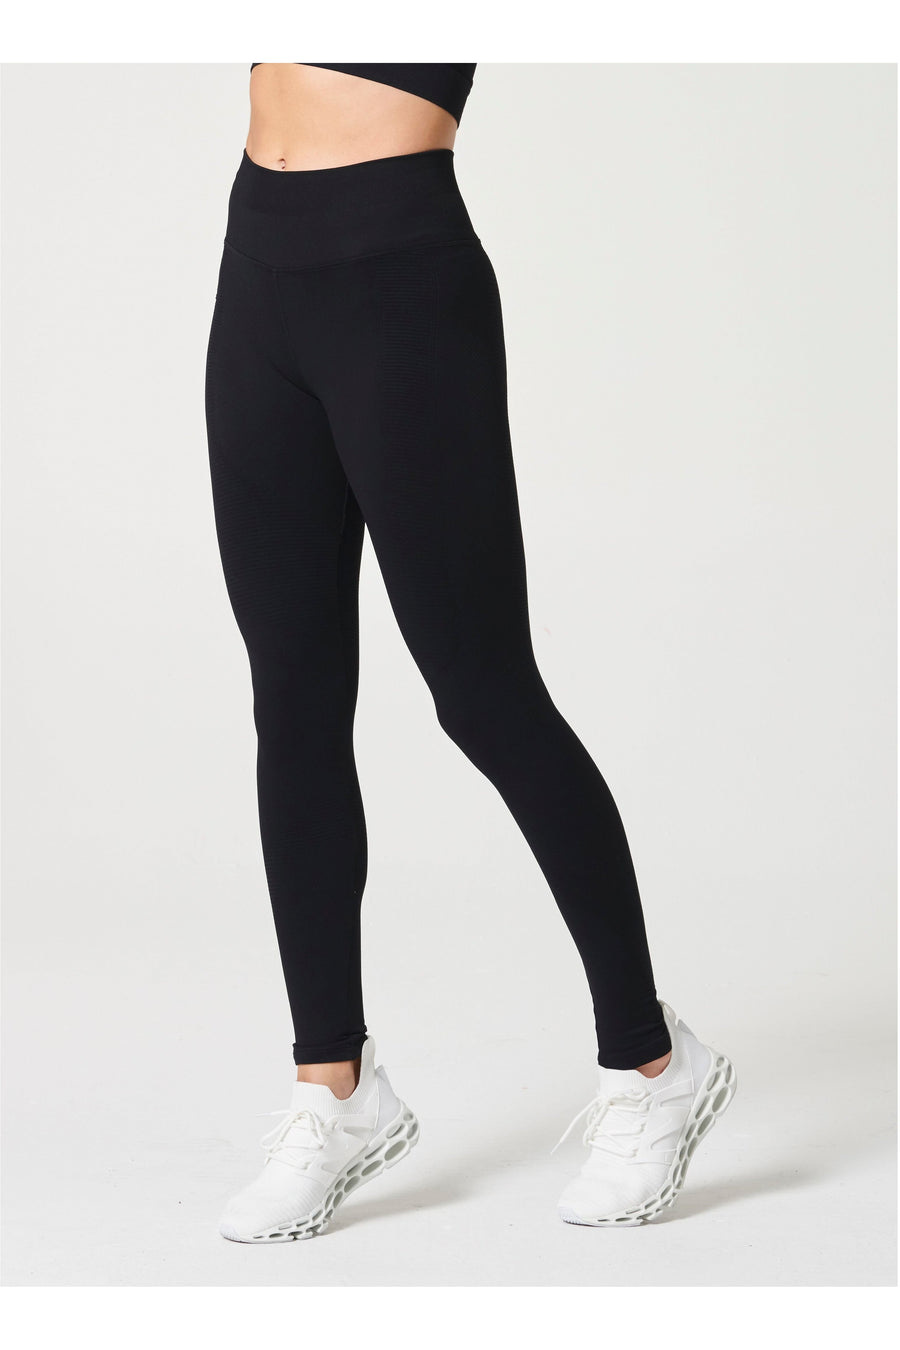 NUX NUX One by One Legging Mineral Wash